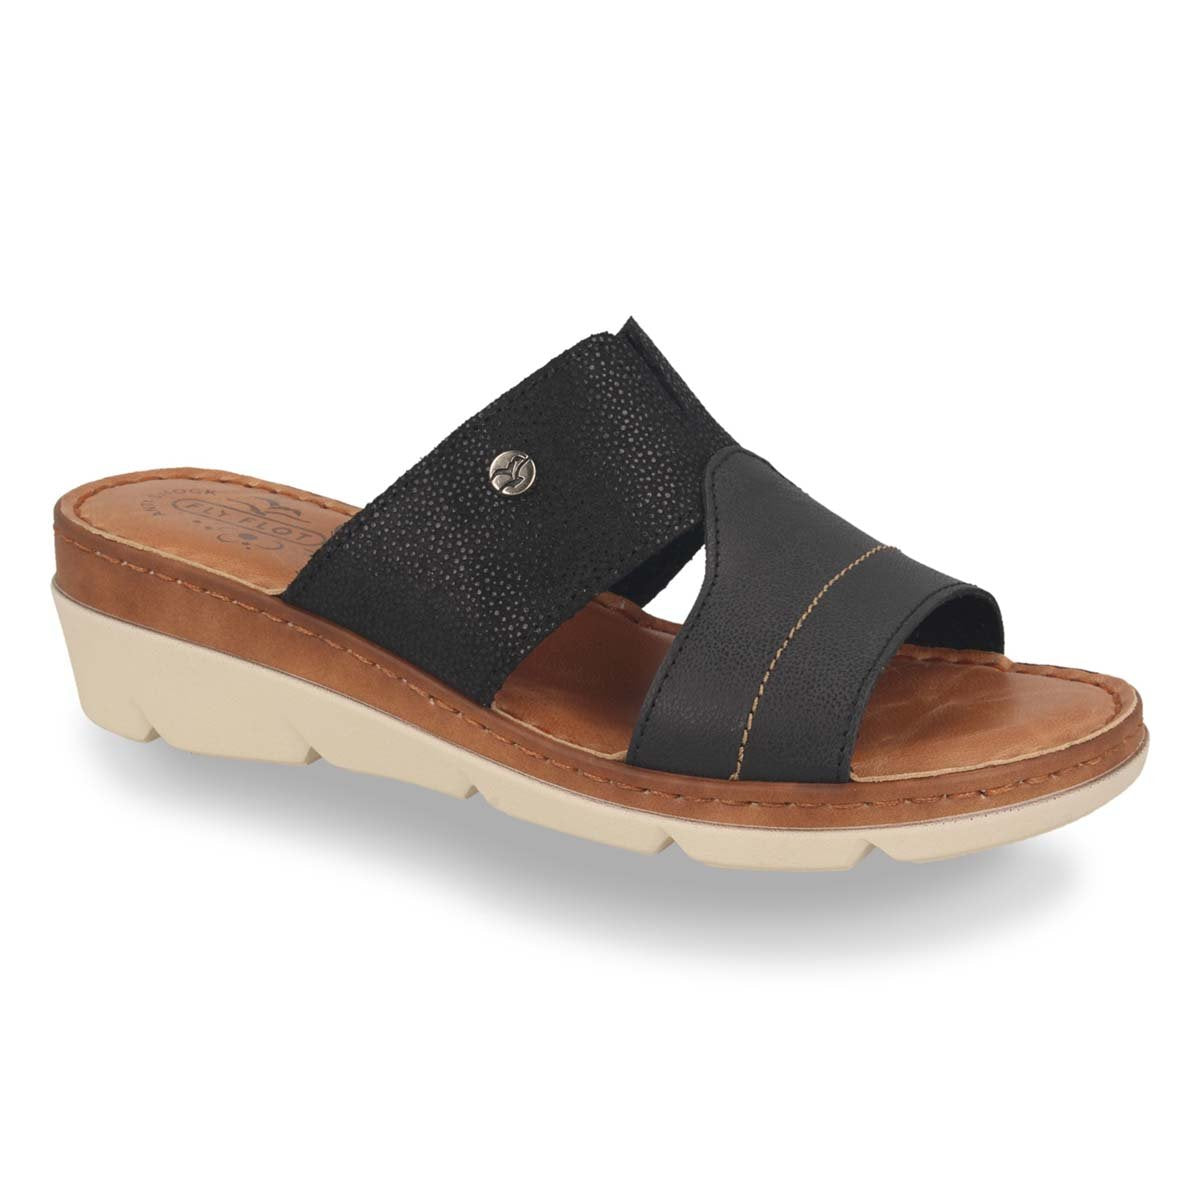 See the Leather Slide Women Sandals With Anti-Shock Cushioned Leather Insole in the colour BEIGE, available in various sizes